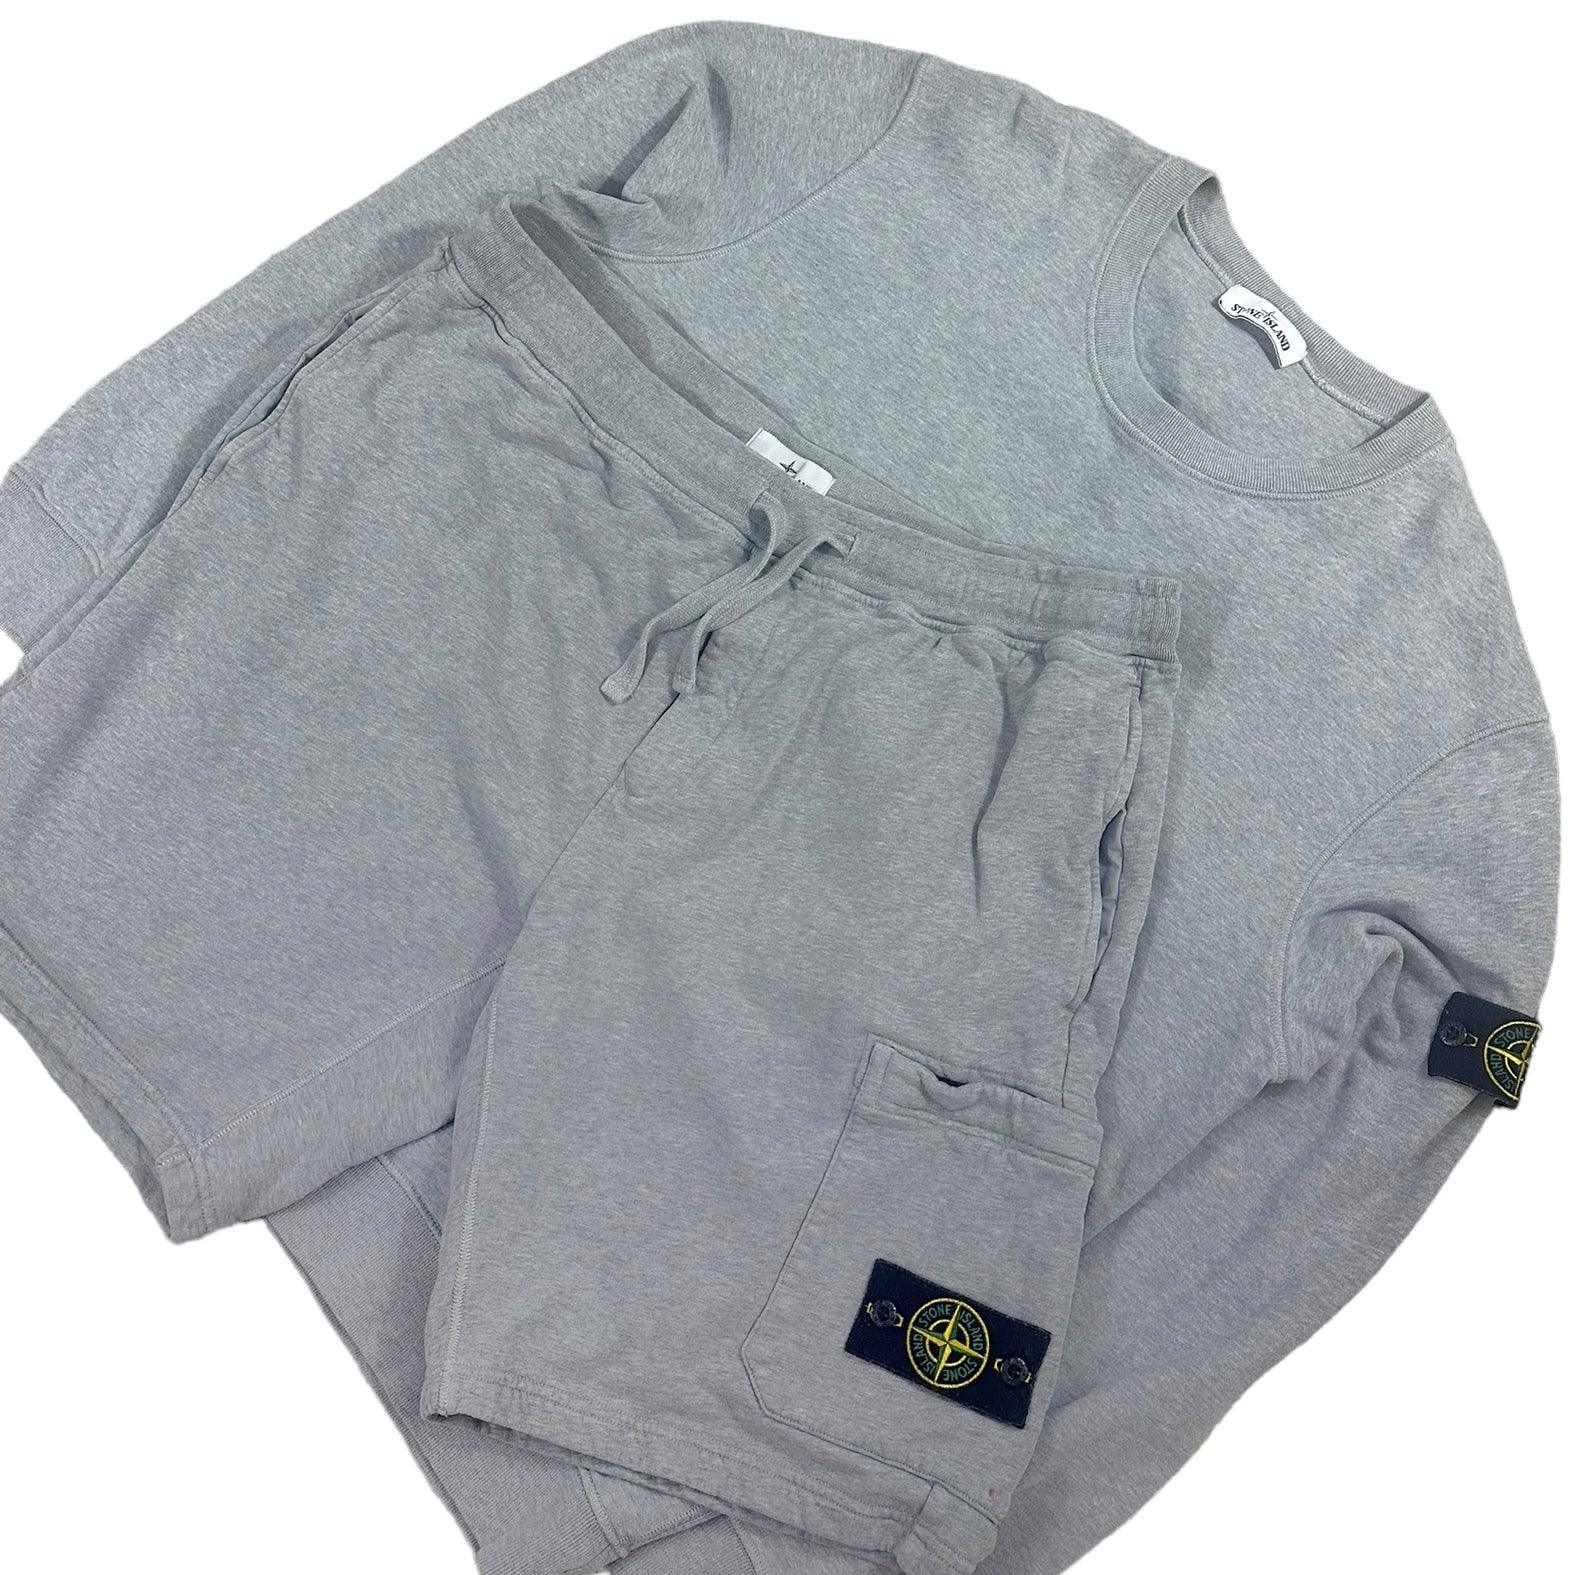 Stone Island Matching Tracksuit Jumper & Shorts Set - Known Source